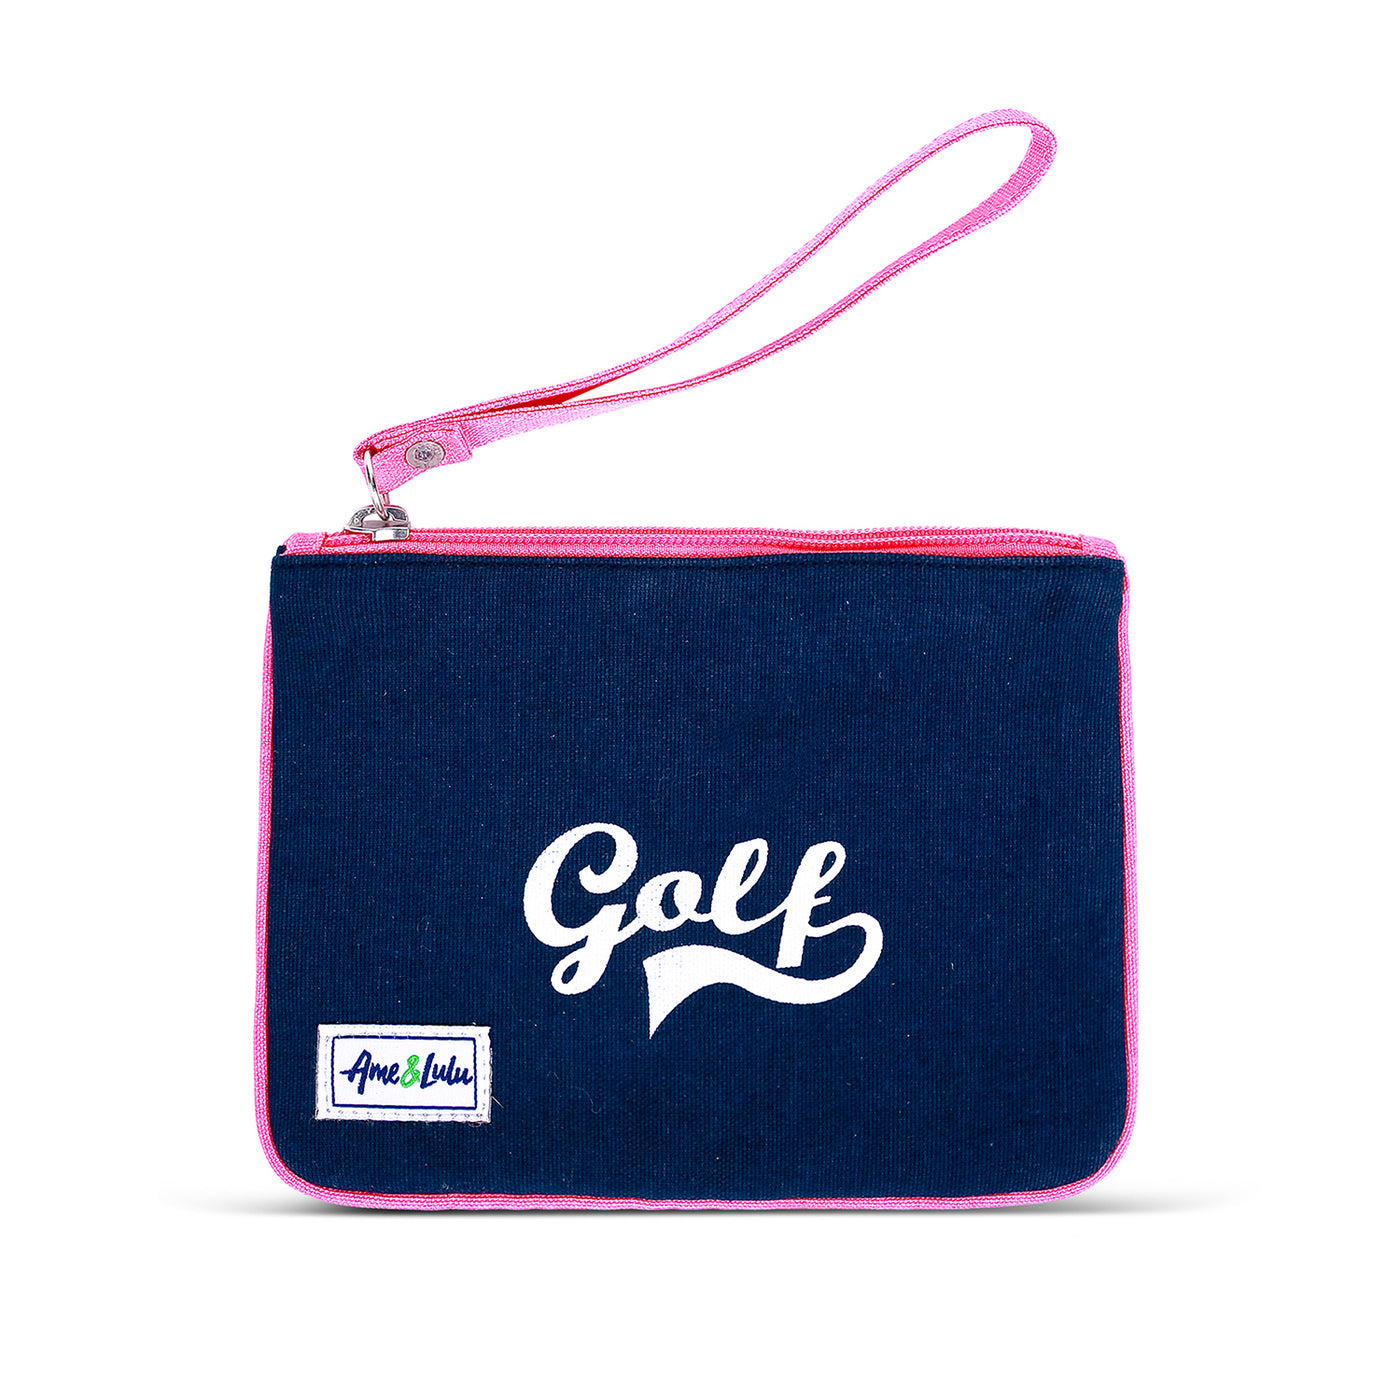 Small navy canvas wristlet with hot pink trim and strap. Front has the word "golf" printed on the front in a white retro font